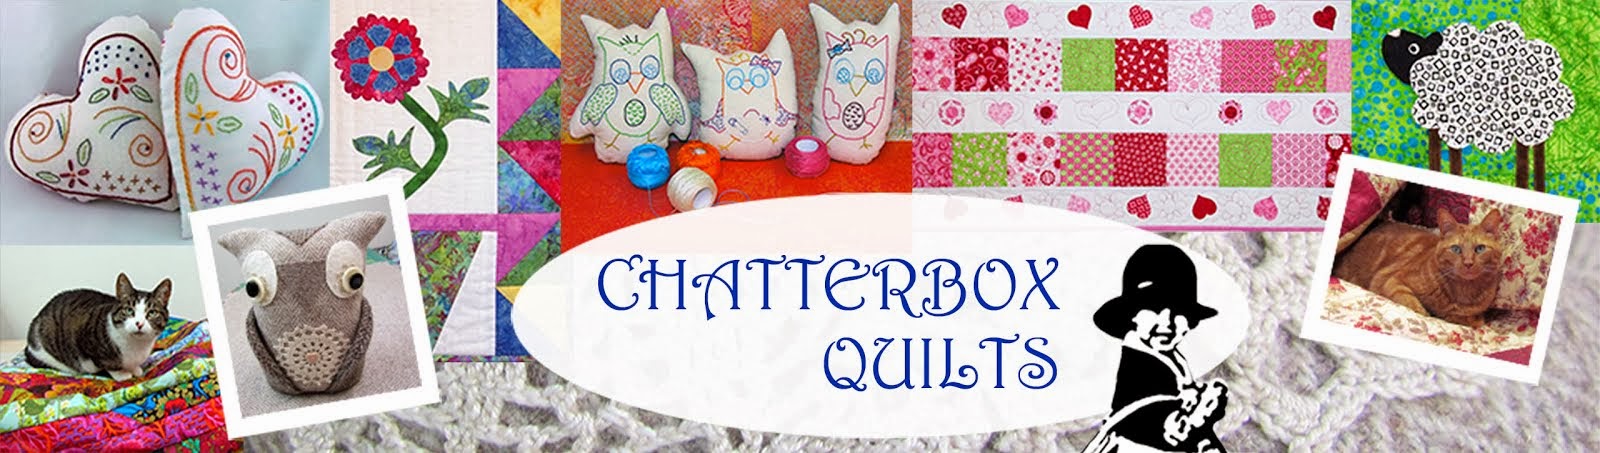 Chatterbox Quilts Chitchat